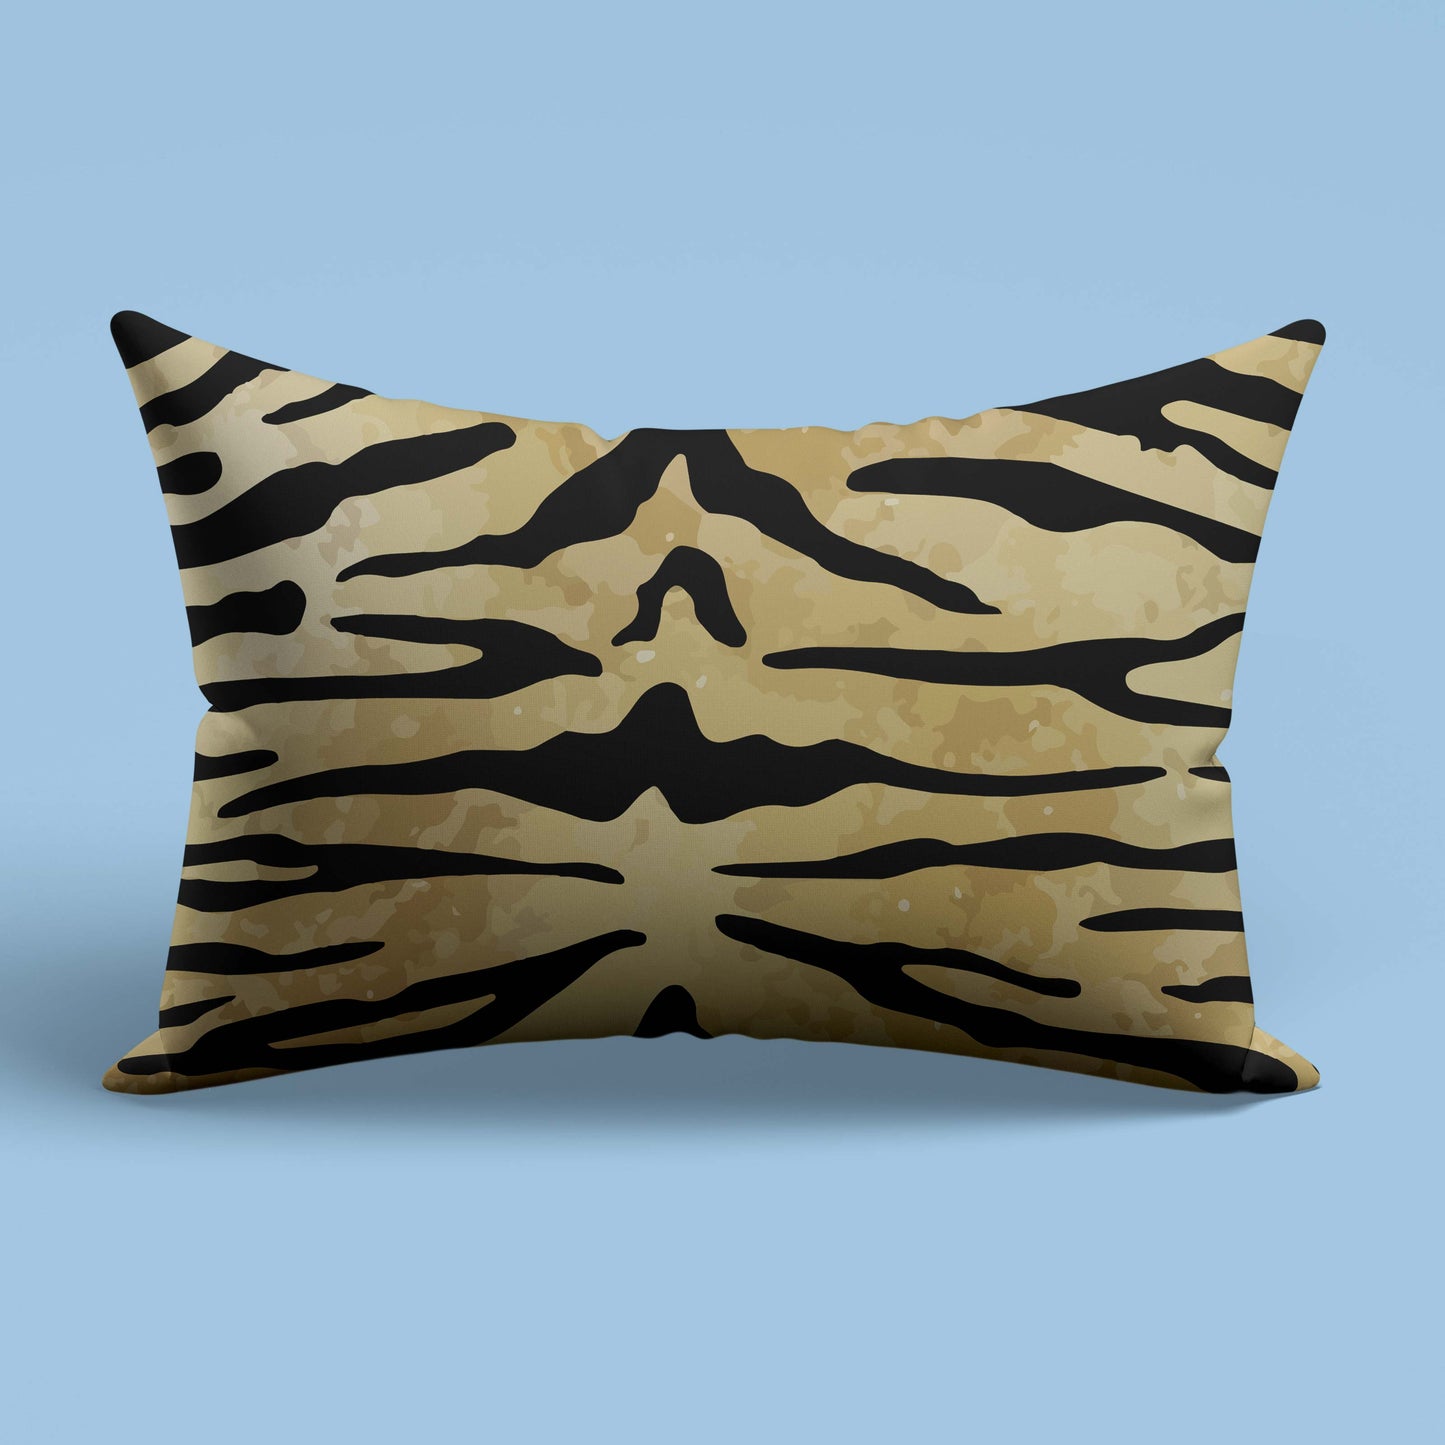 Aged Tiger Skin Slim Cushion Cover Pattern trendy home